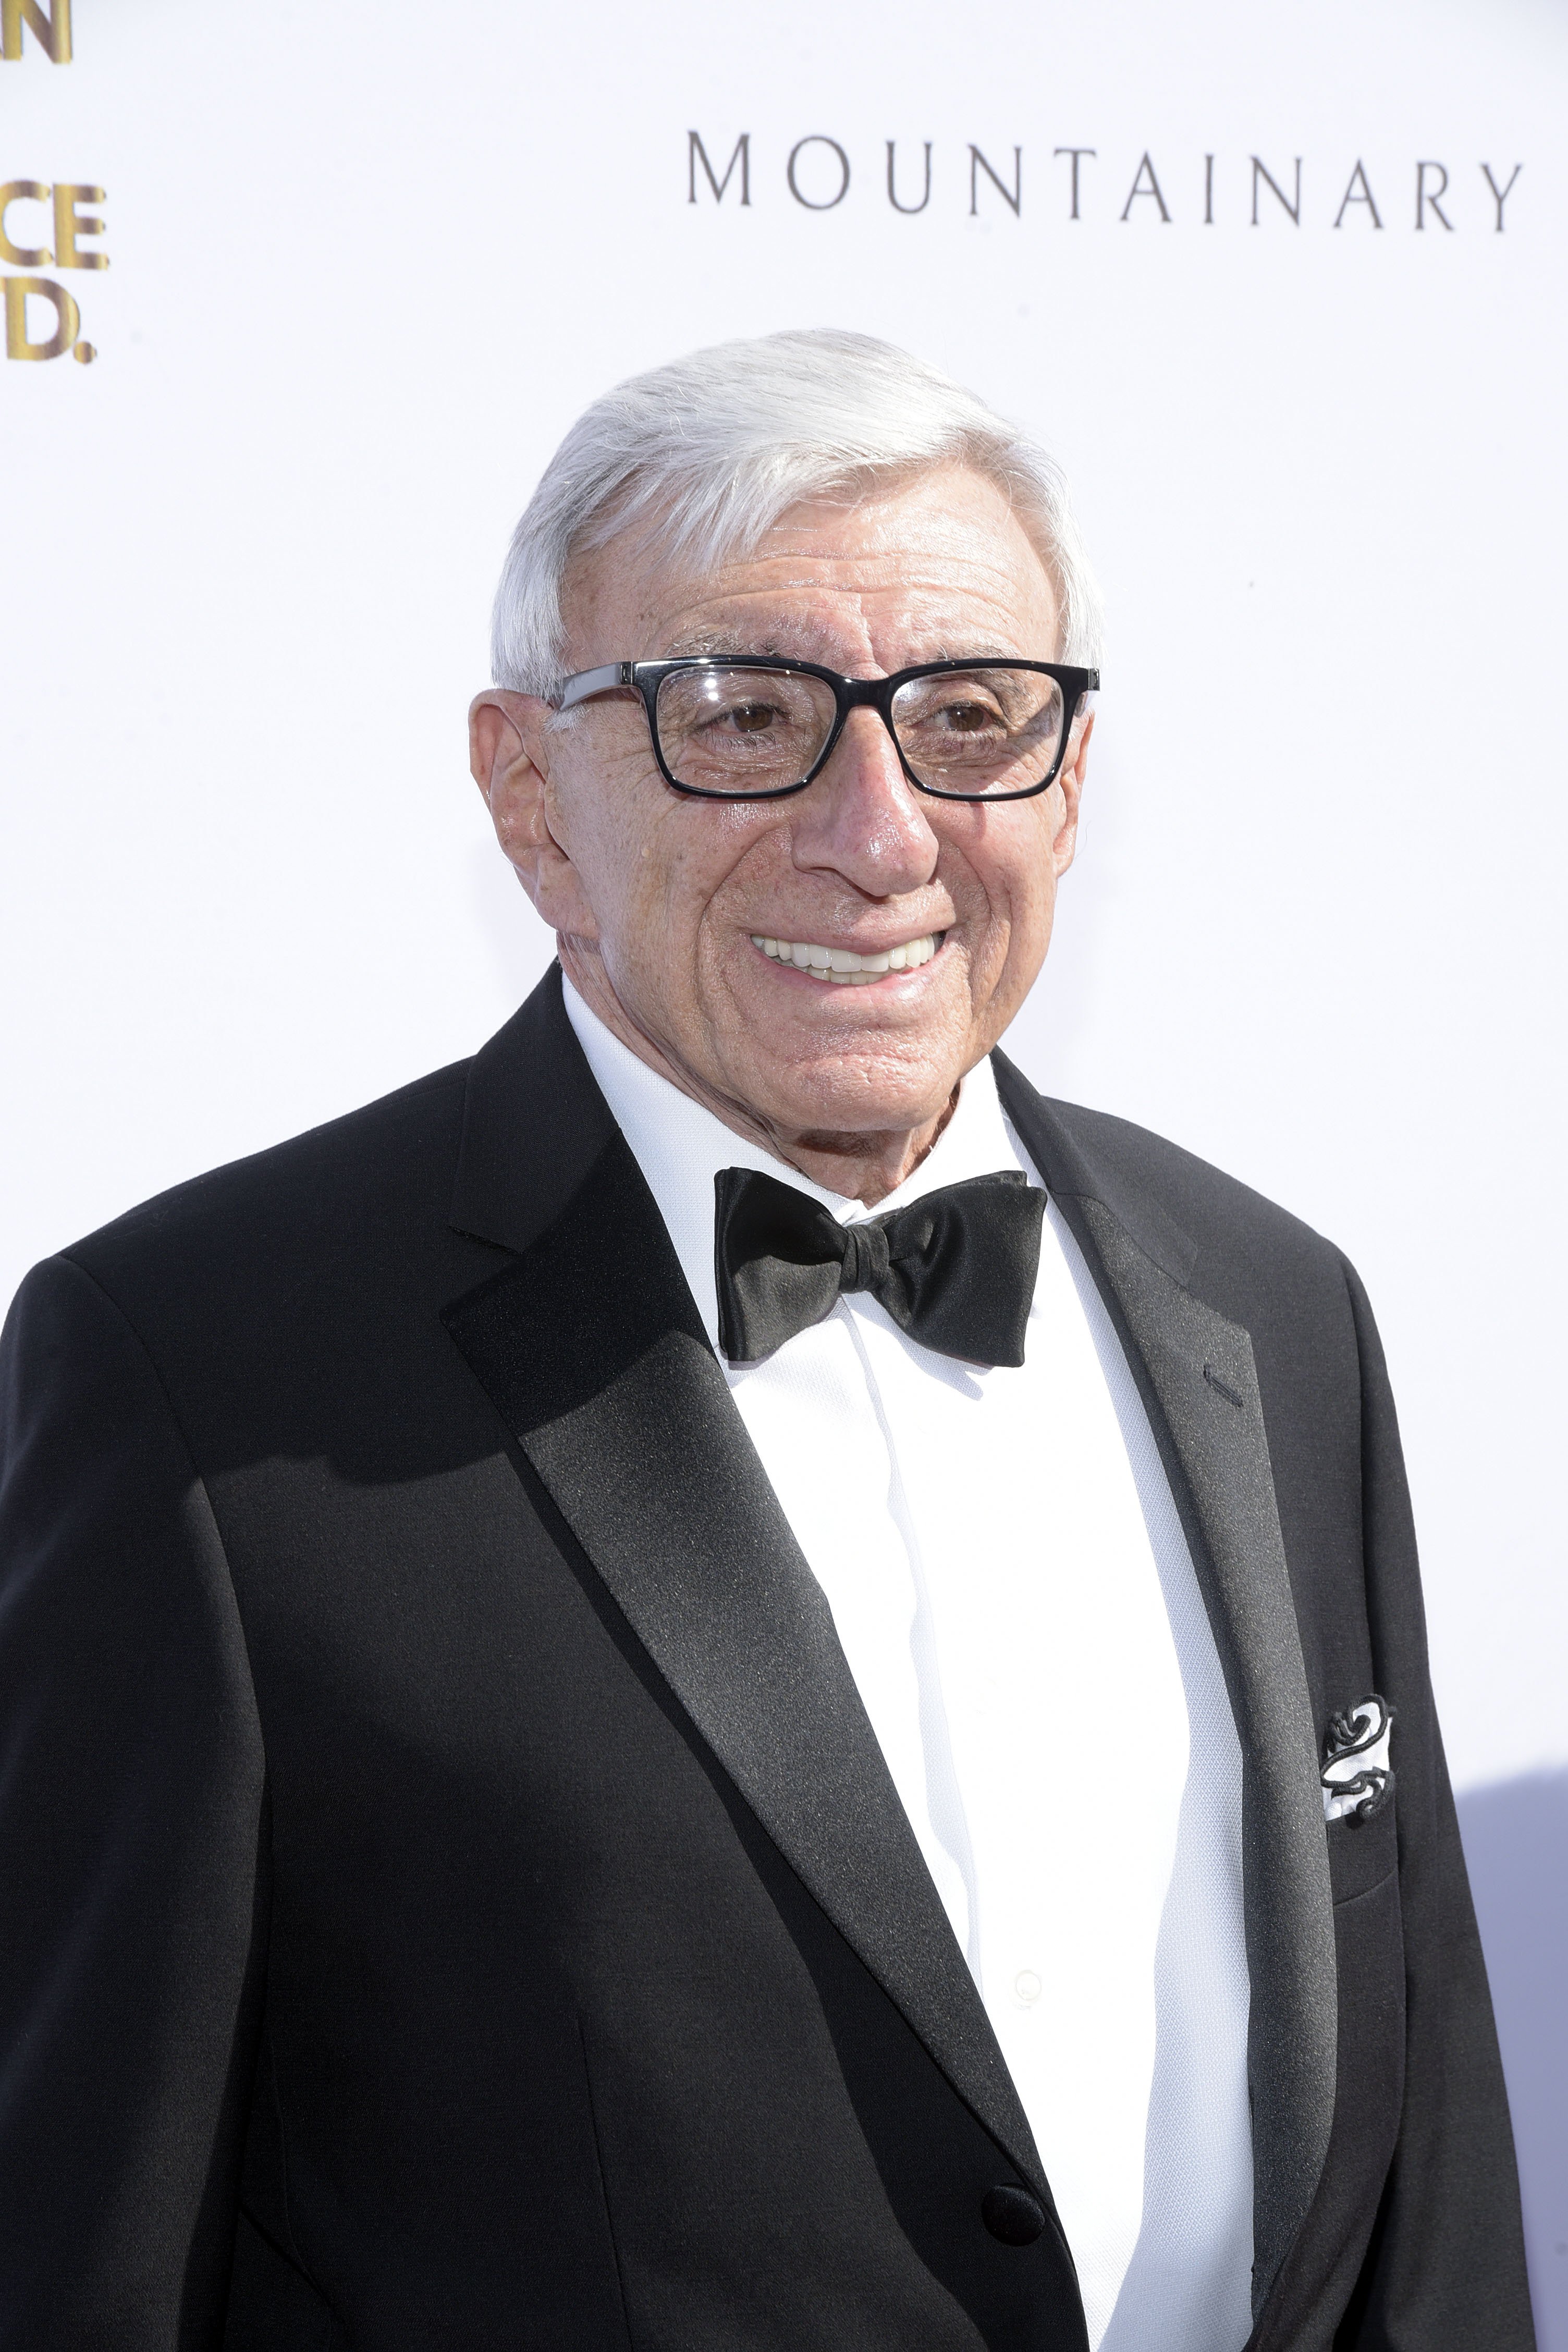 Jamie Farr attends the 4th annual Roger Neal Oscar Viewing Dinner Icon Awards and after party at Hollywood Palladium on February 24, 2019 in Los Angeles, California. | Source: Getty Images